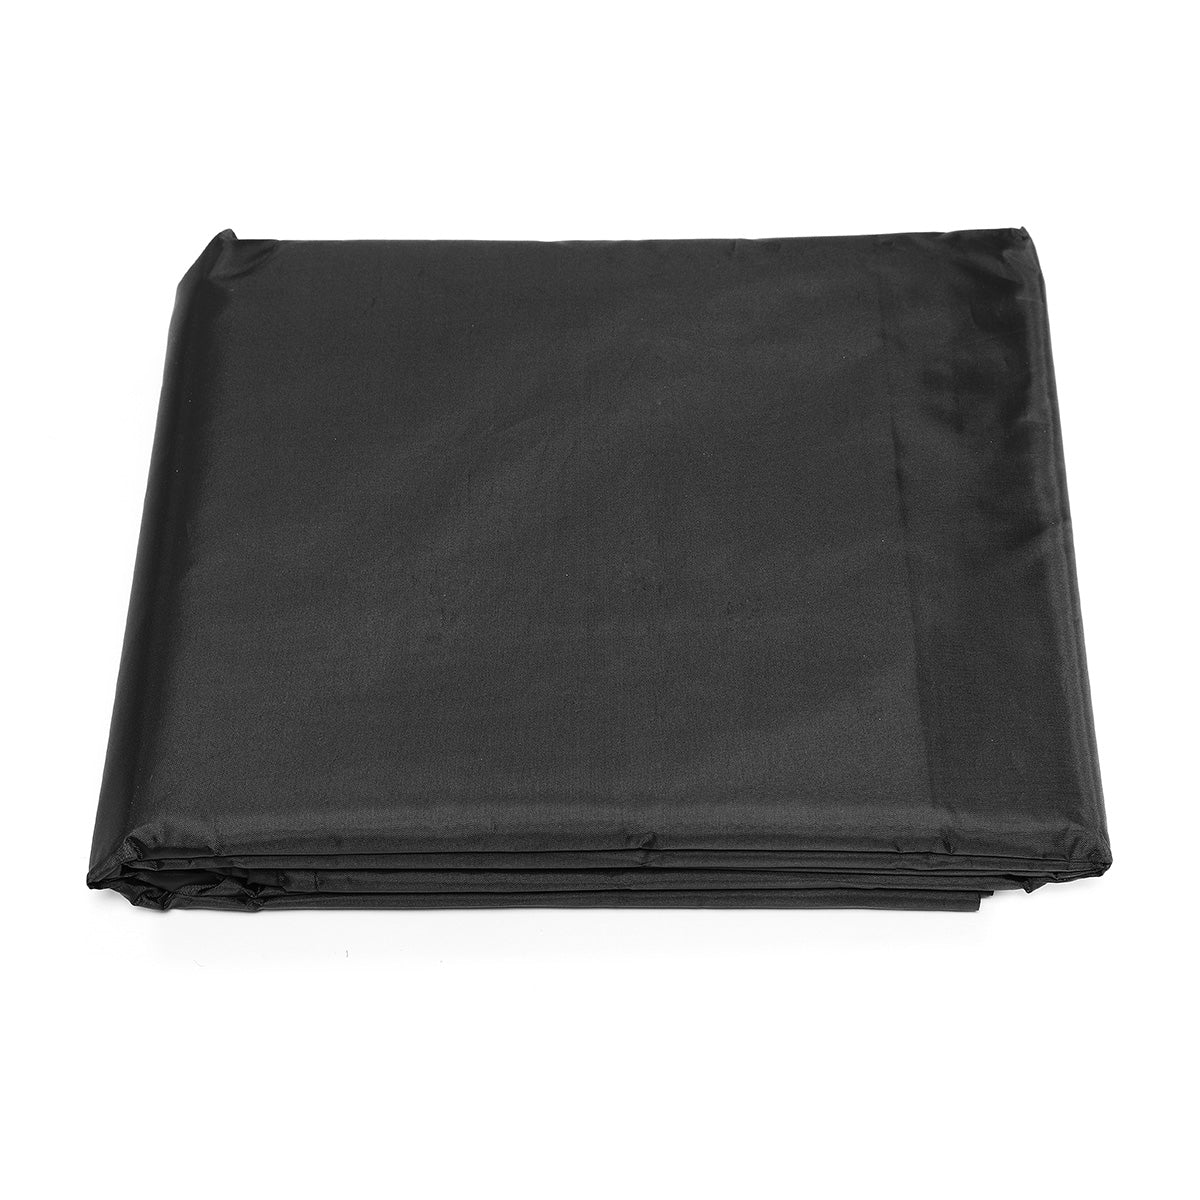 2.5x1.5x1m Garden Patio Furniture Waterproof Cover Dust Cover Oxford Outdoor Rattan Table Protection